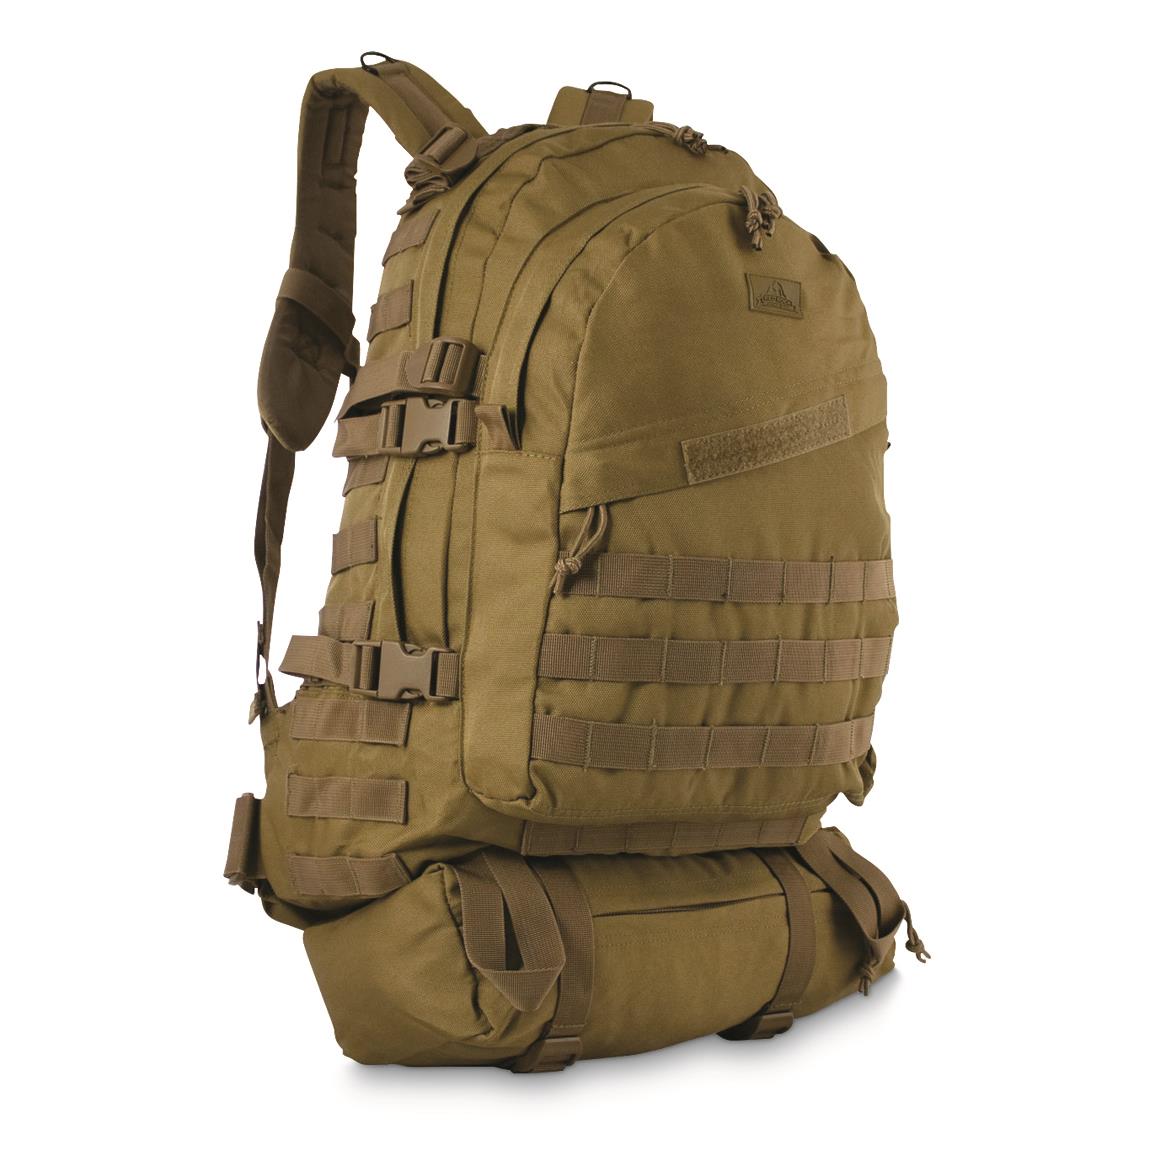 Red Rock Outdoor Gear Sidekick Sling Bag - 299878, Military Style ...